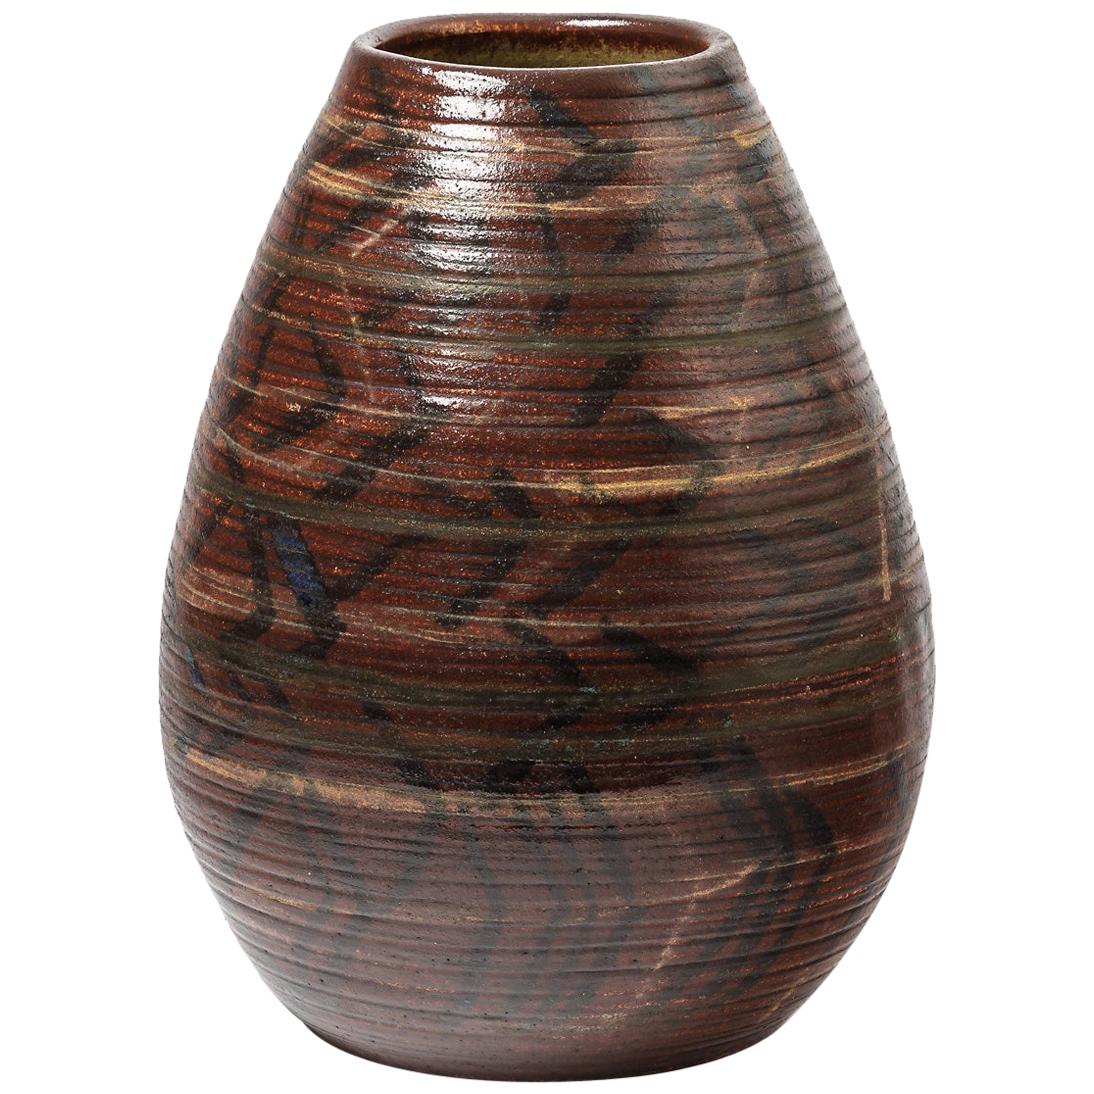 Ceramic Vase with Geometrical Decoration by Accolay, circa 1970-1980